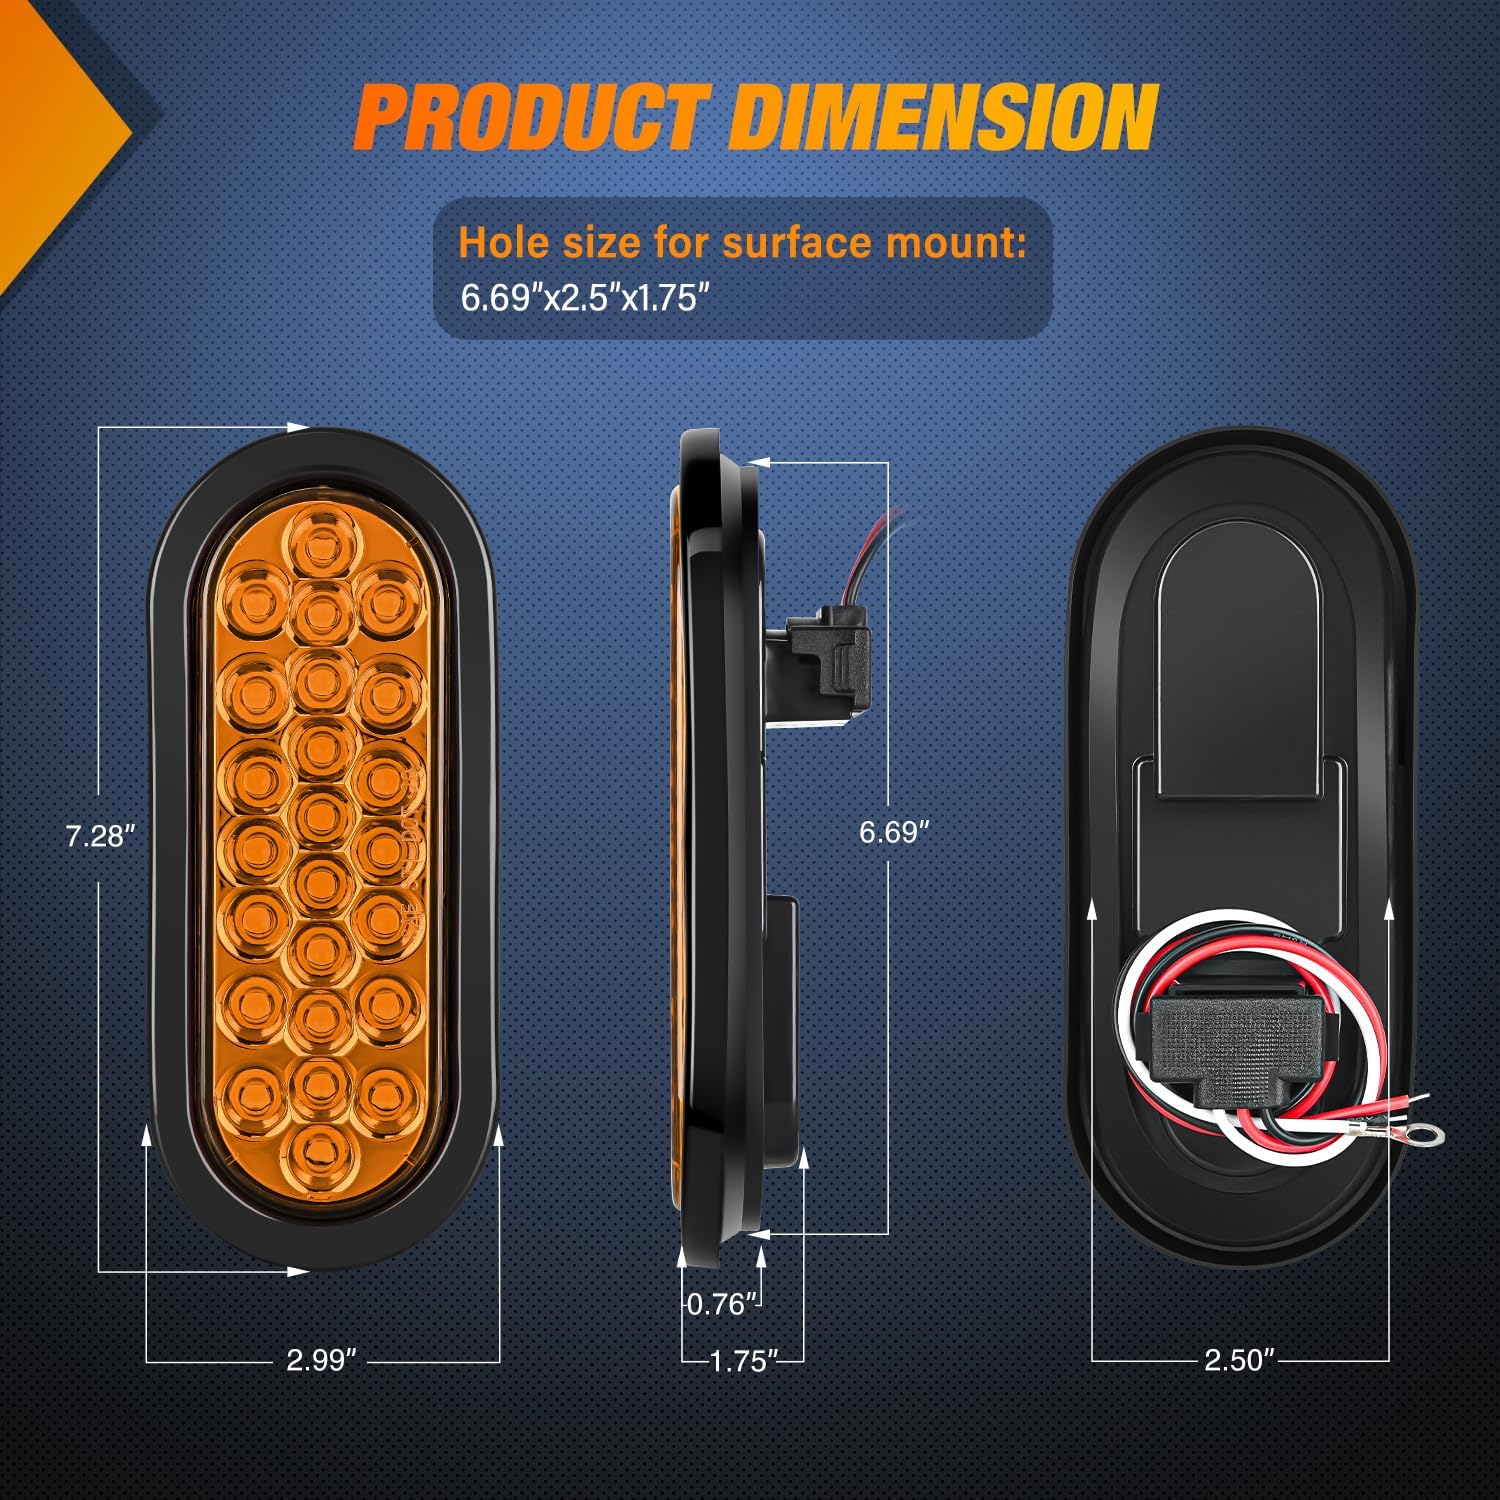 6" Oval Amber 24Leds Trailer Tail Lights (Pair) Nilight